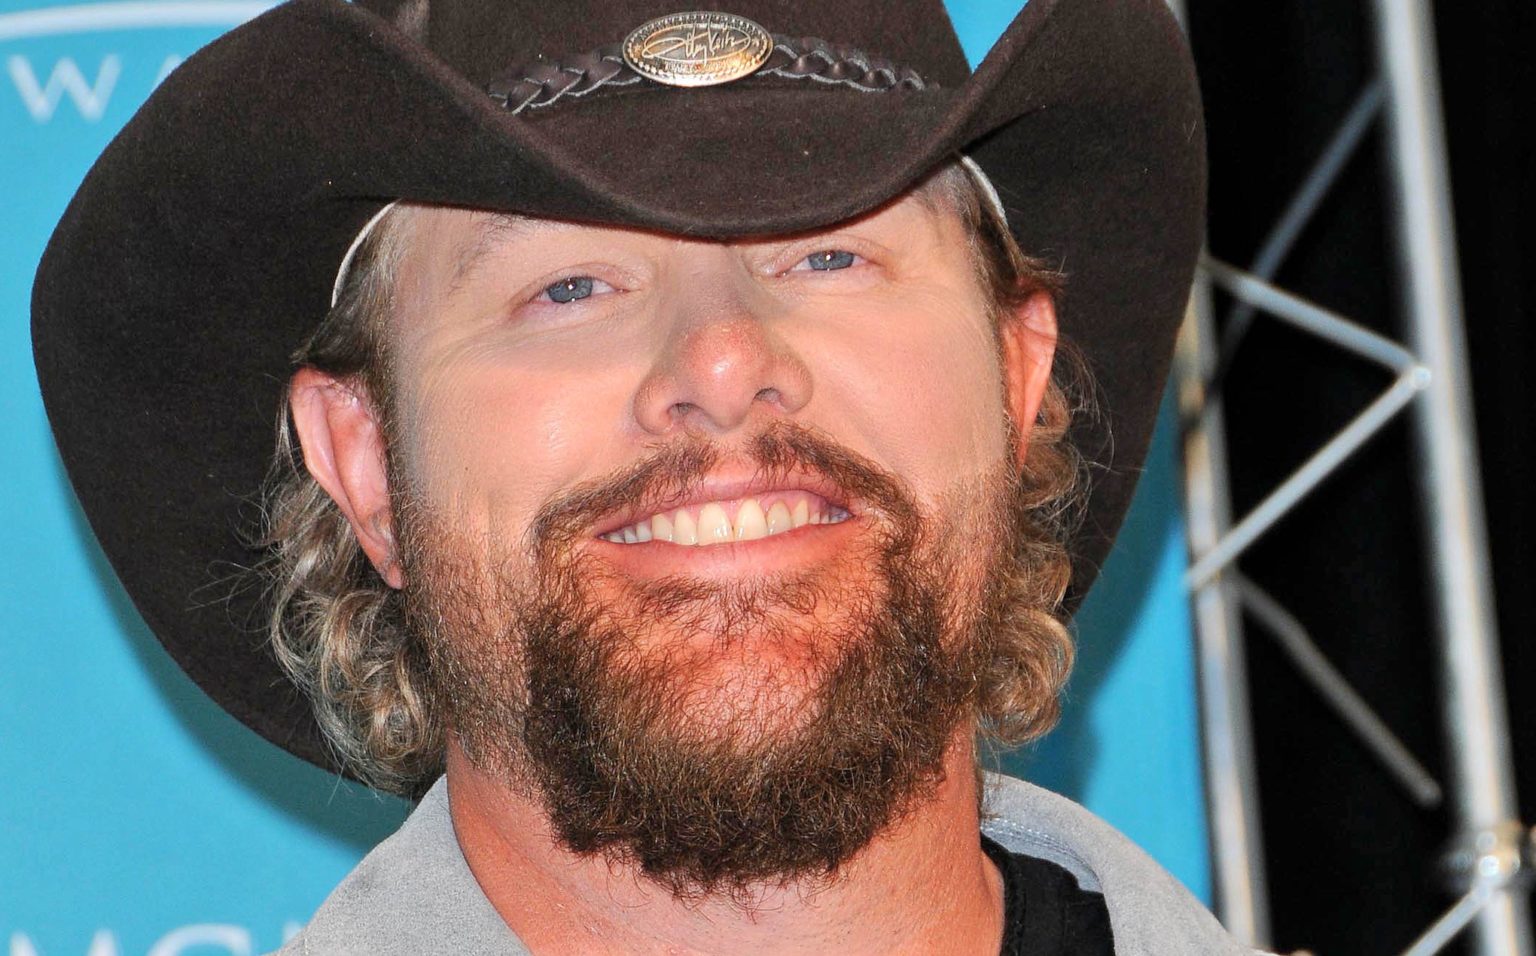 Toby Keith Shares Major Cancer Update Six Months After Heartbreaking